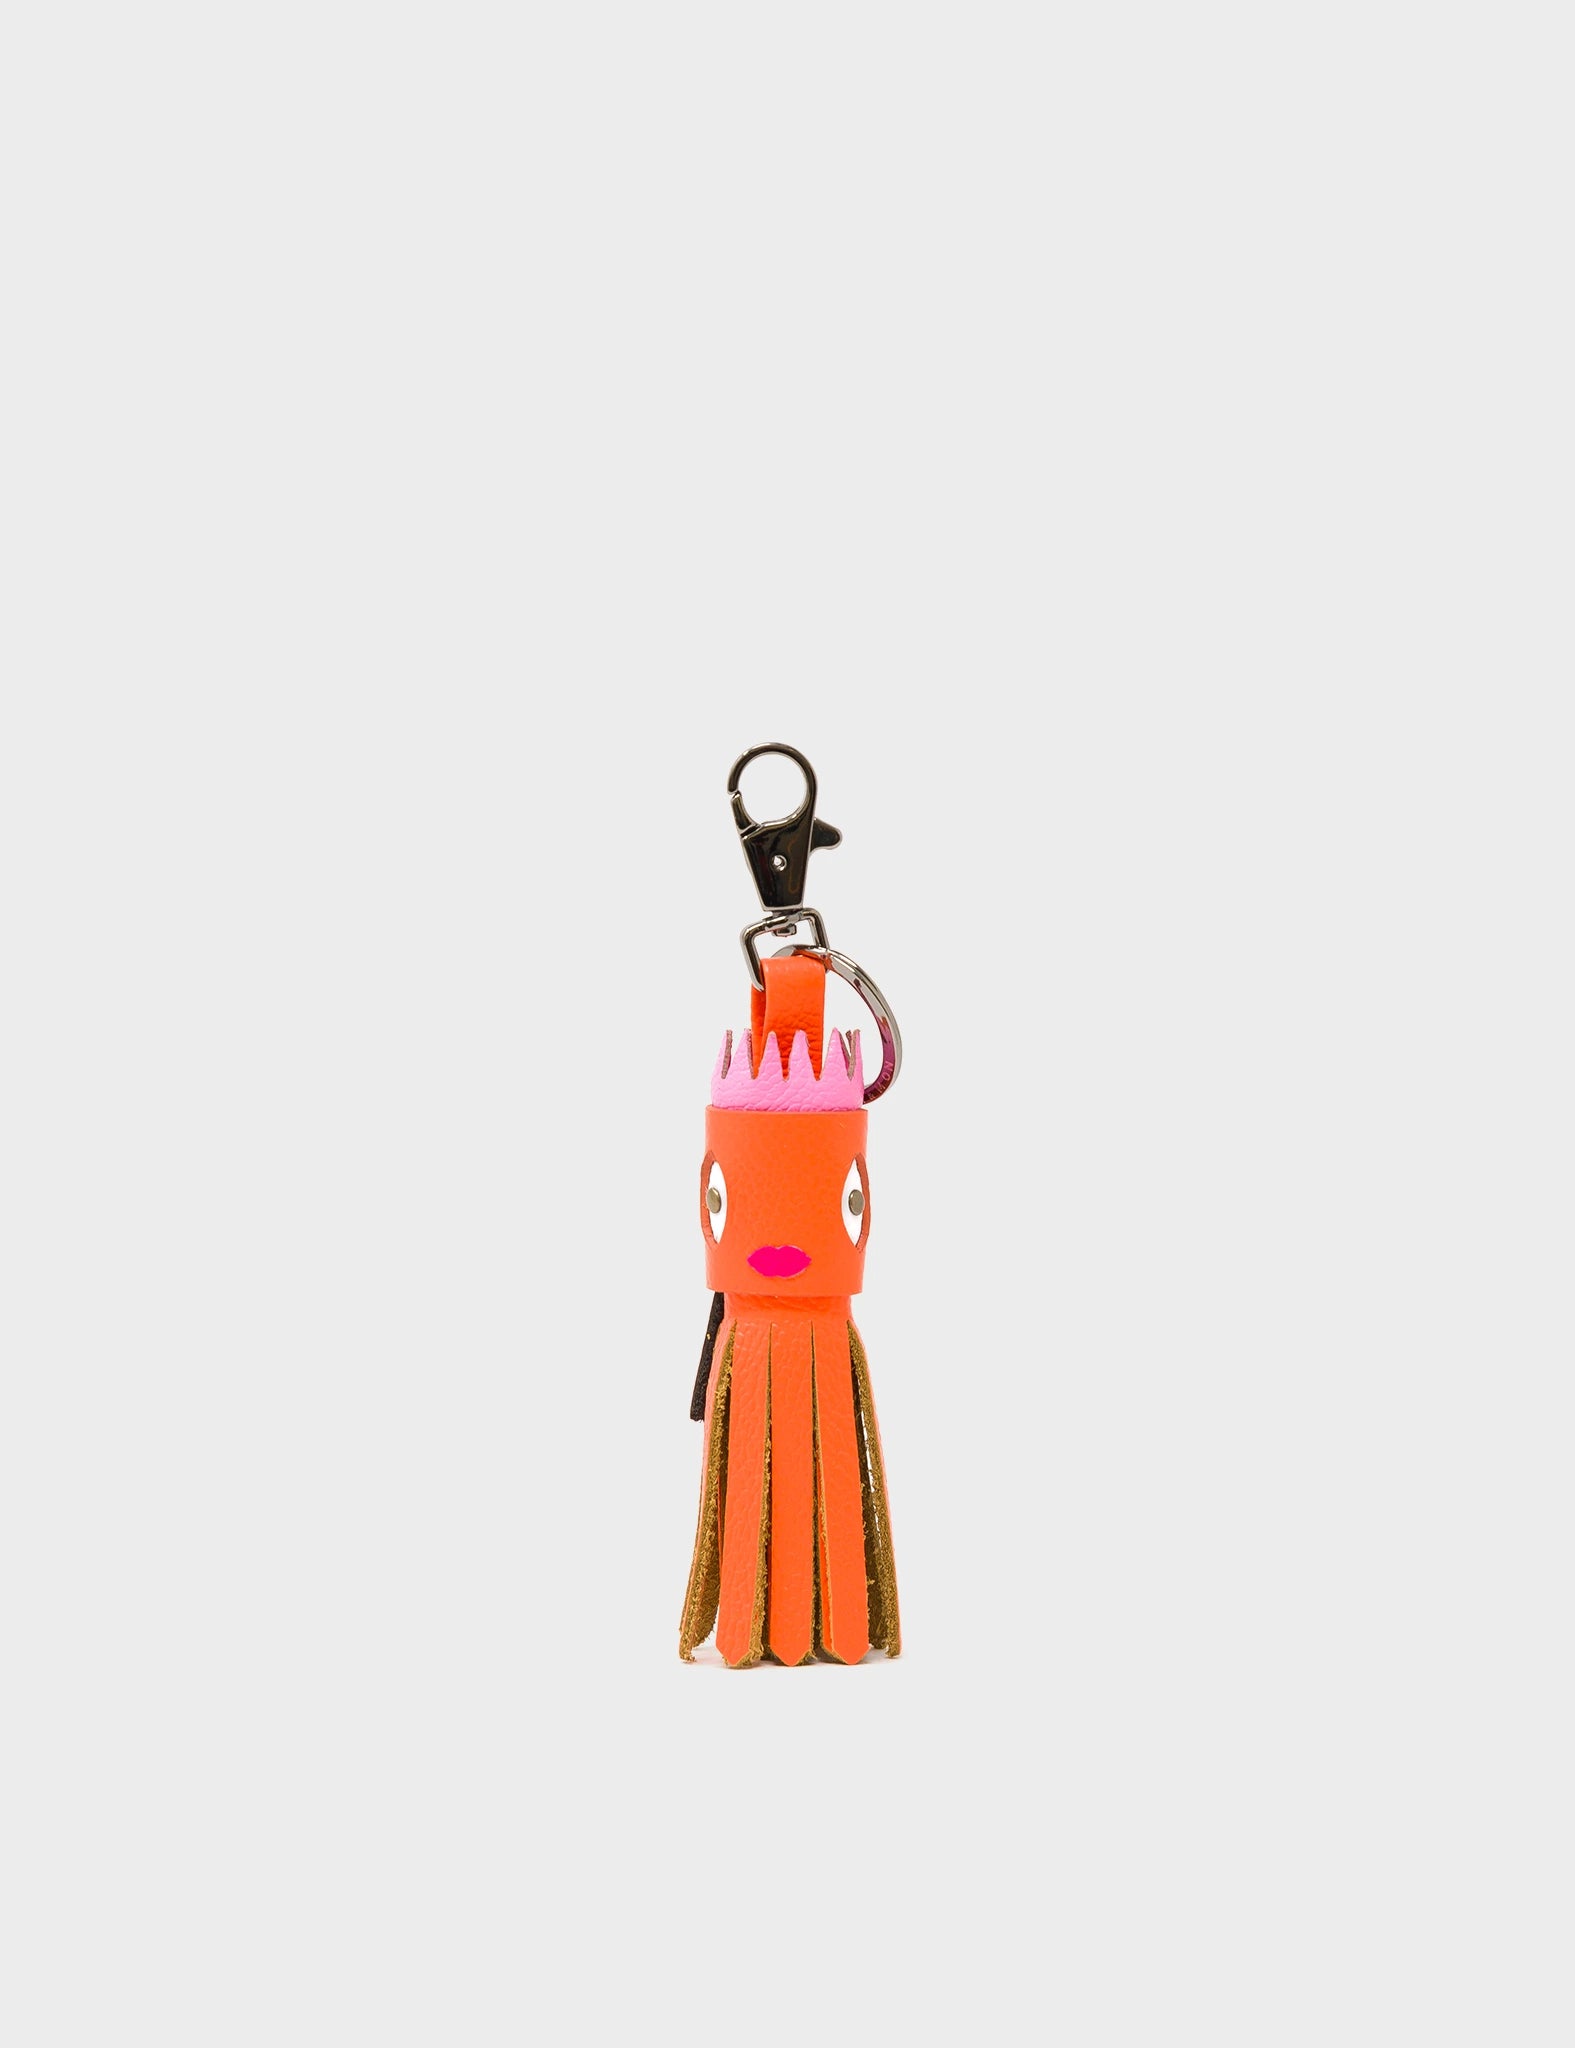 Queen Callie Marie Charm - Neon Orange and Pink Leather Keychain